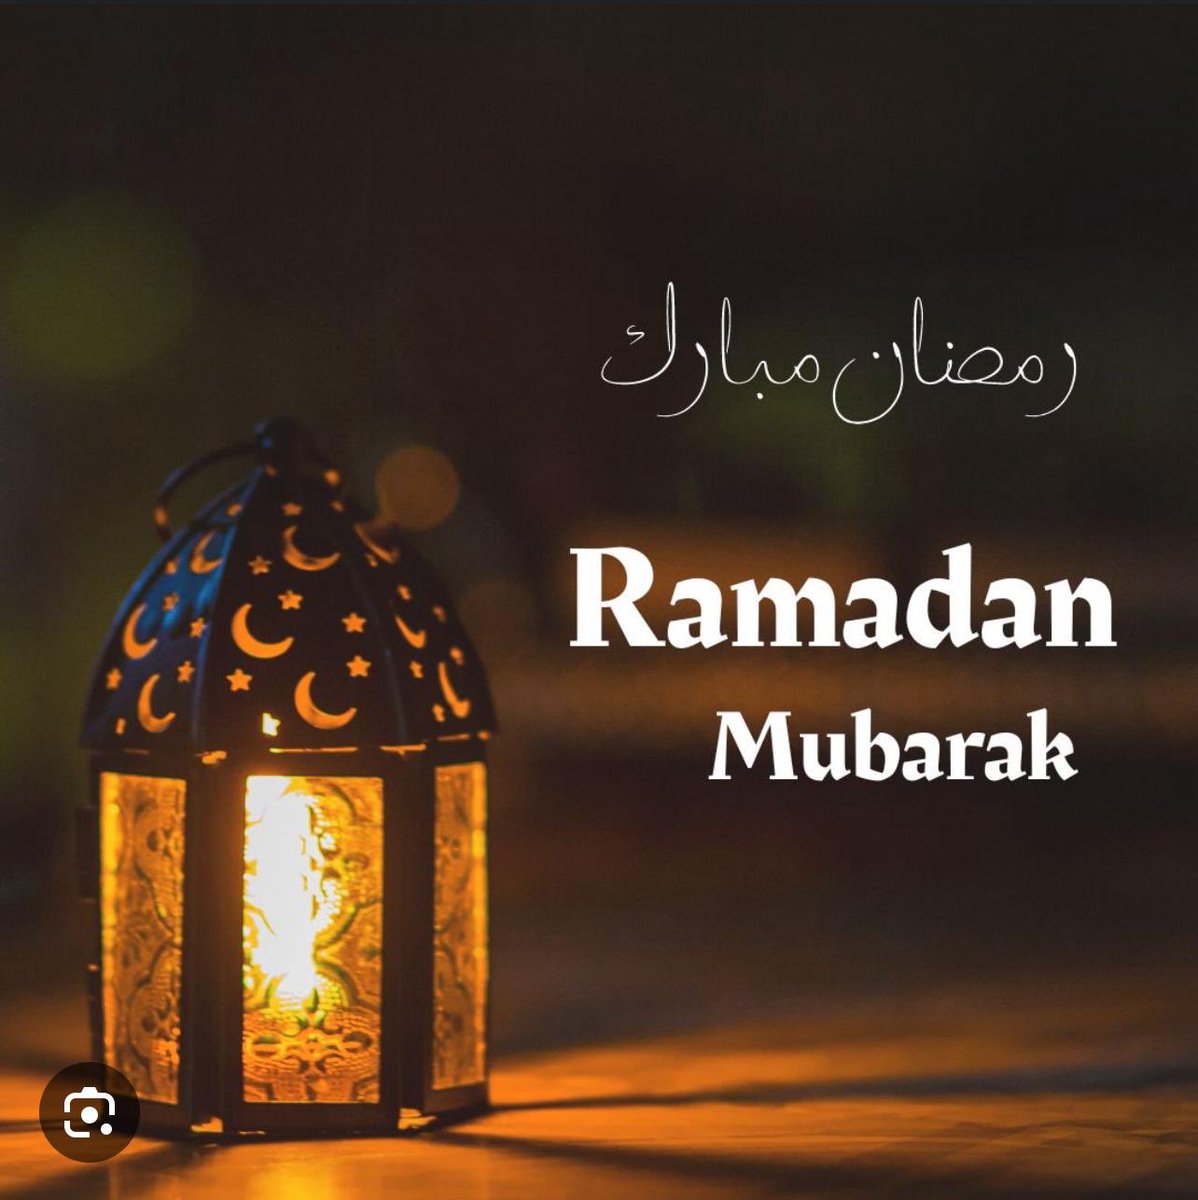 As we usher in the holy month of Ramadhan, a month of blessing, mercy and maghfira, may the Almighty Allah accept our Siyaam, and ibadaat. Ramadhan Mubarak to all muslim brothers and sisters. may peace prevail.